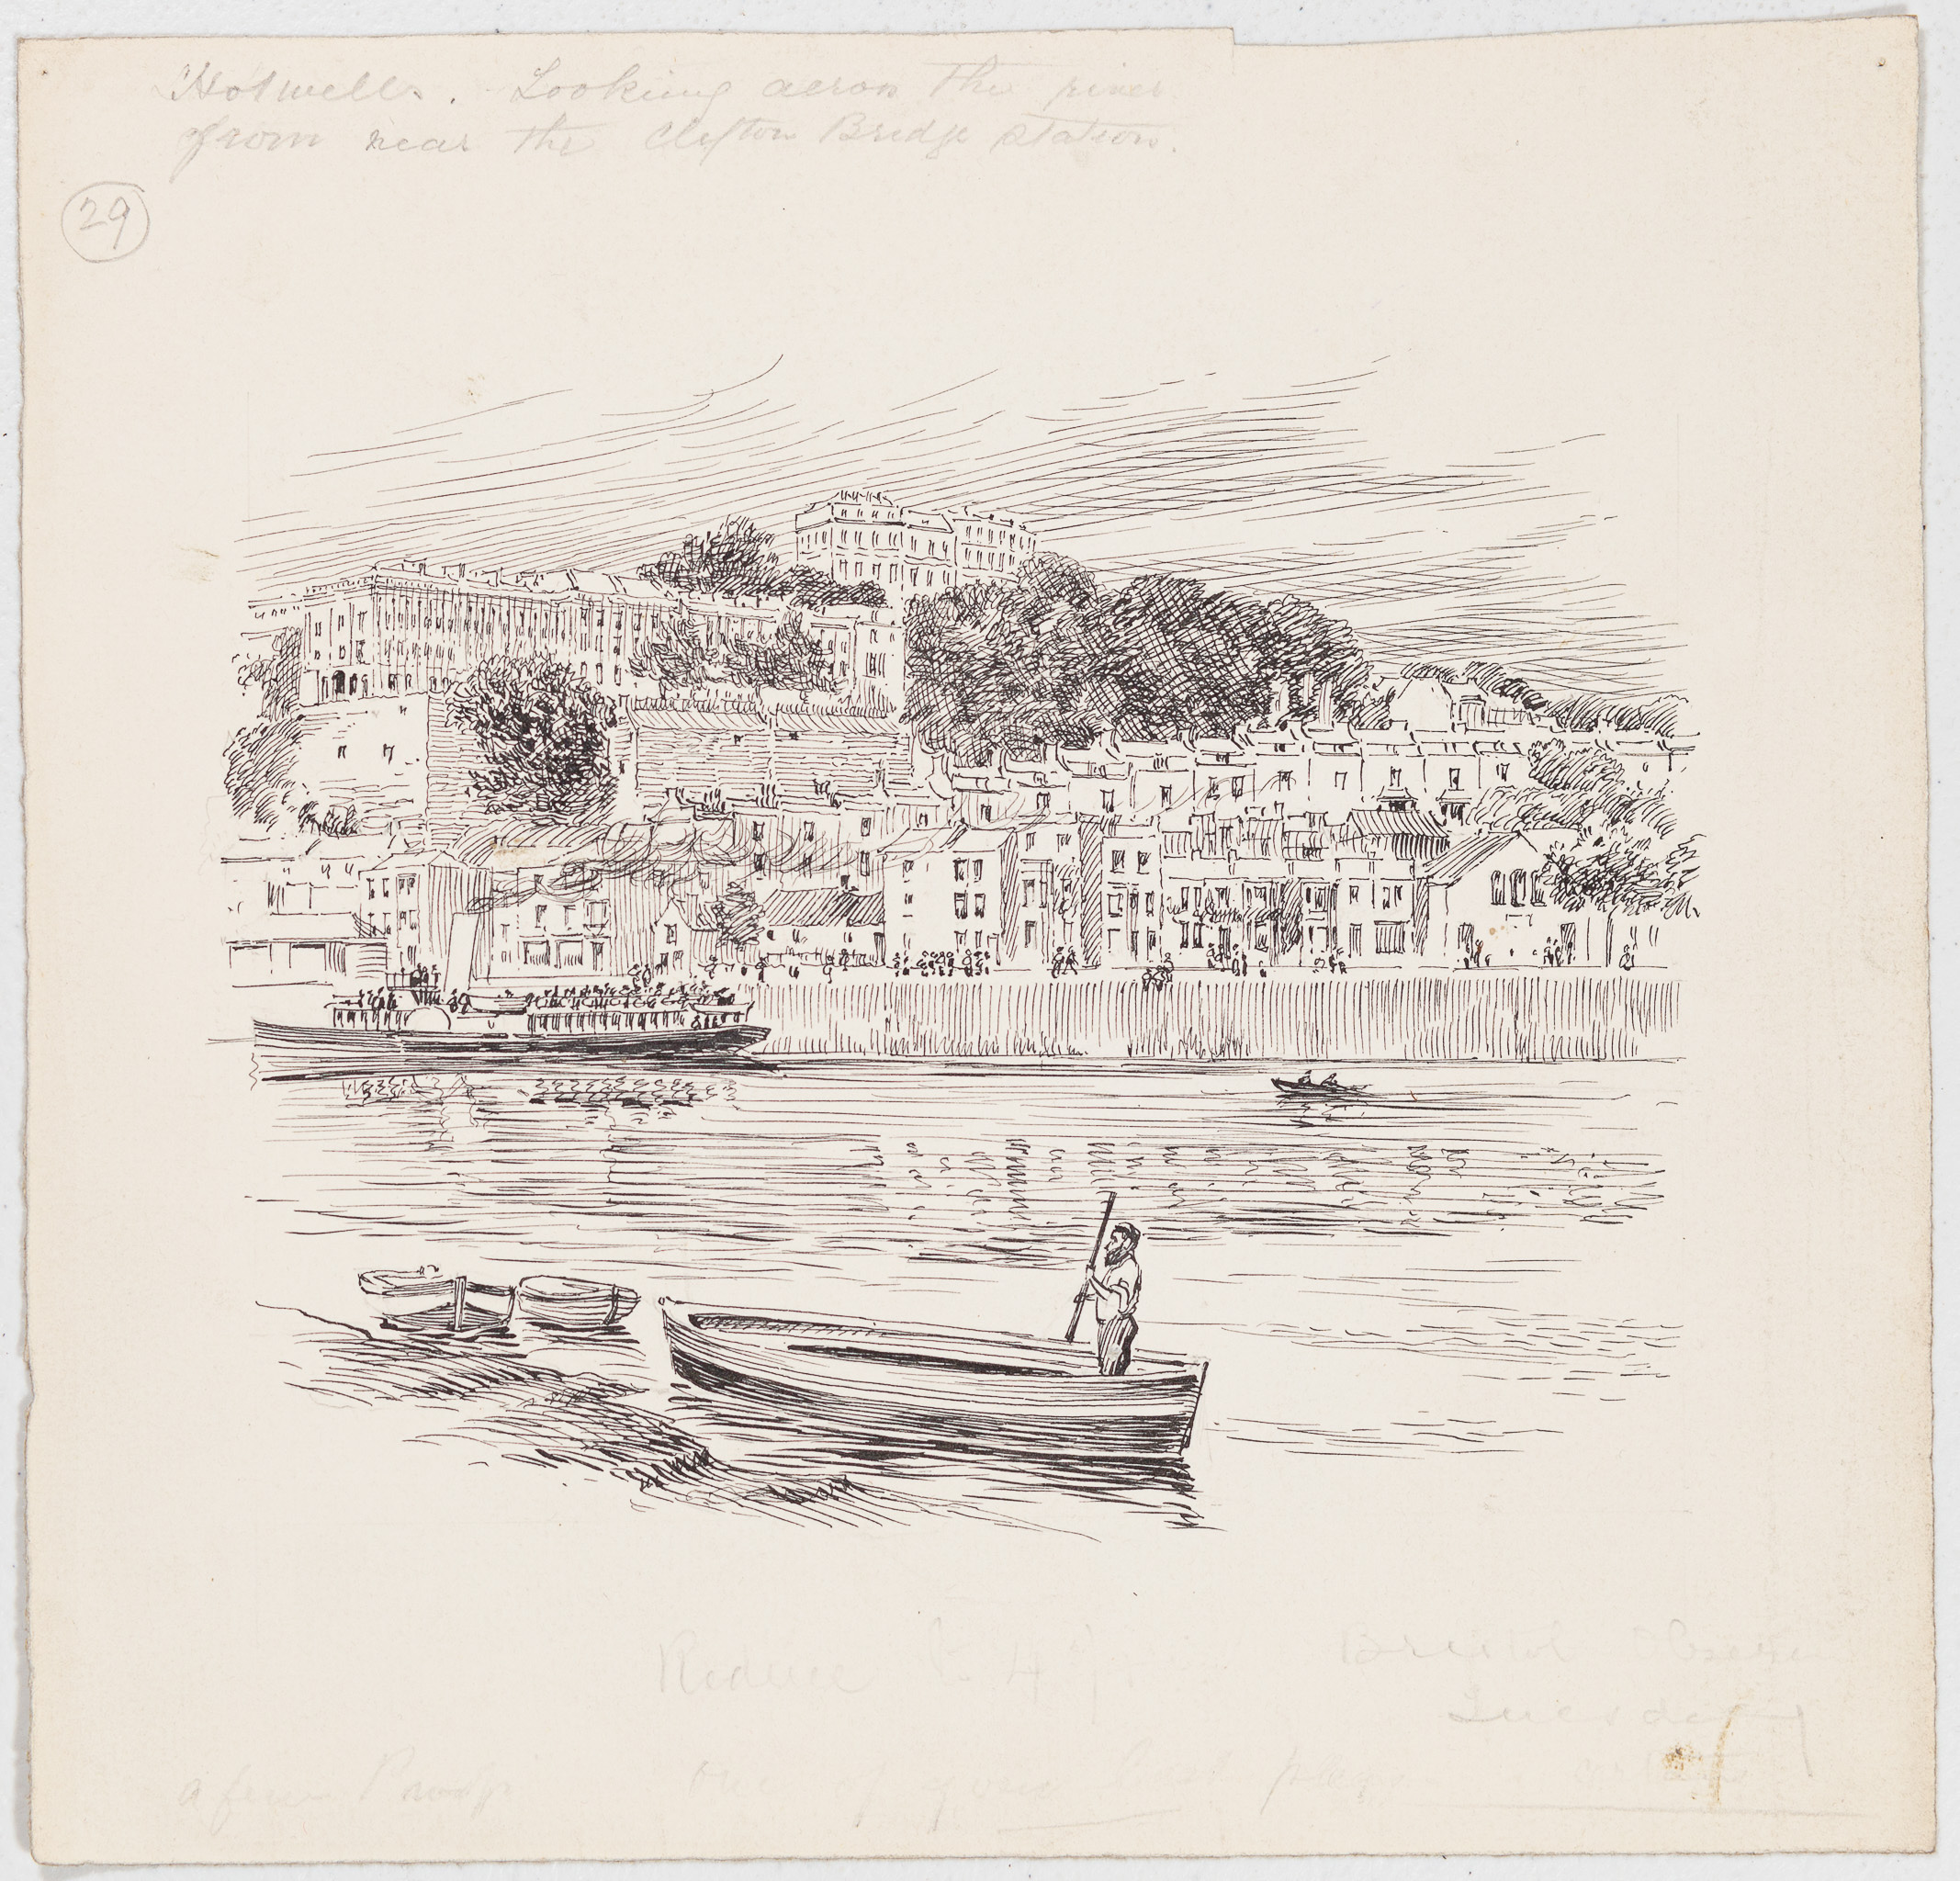 Loxton Full
Here's a photo of the entire original Samuel Loxton ink drawing, including the title, Hotwells, Looking across the river from near the Clifton Brid...